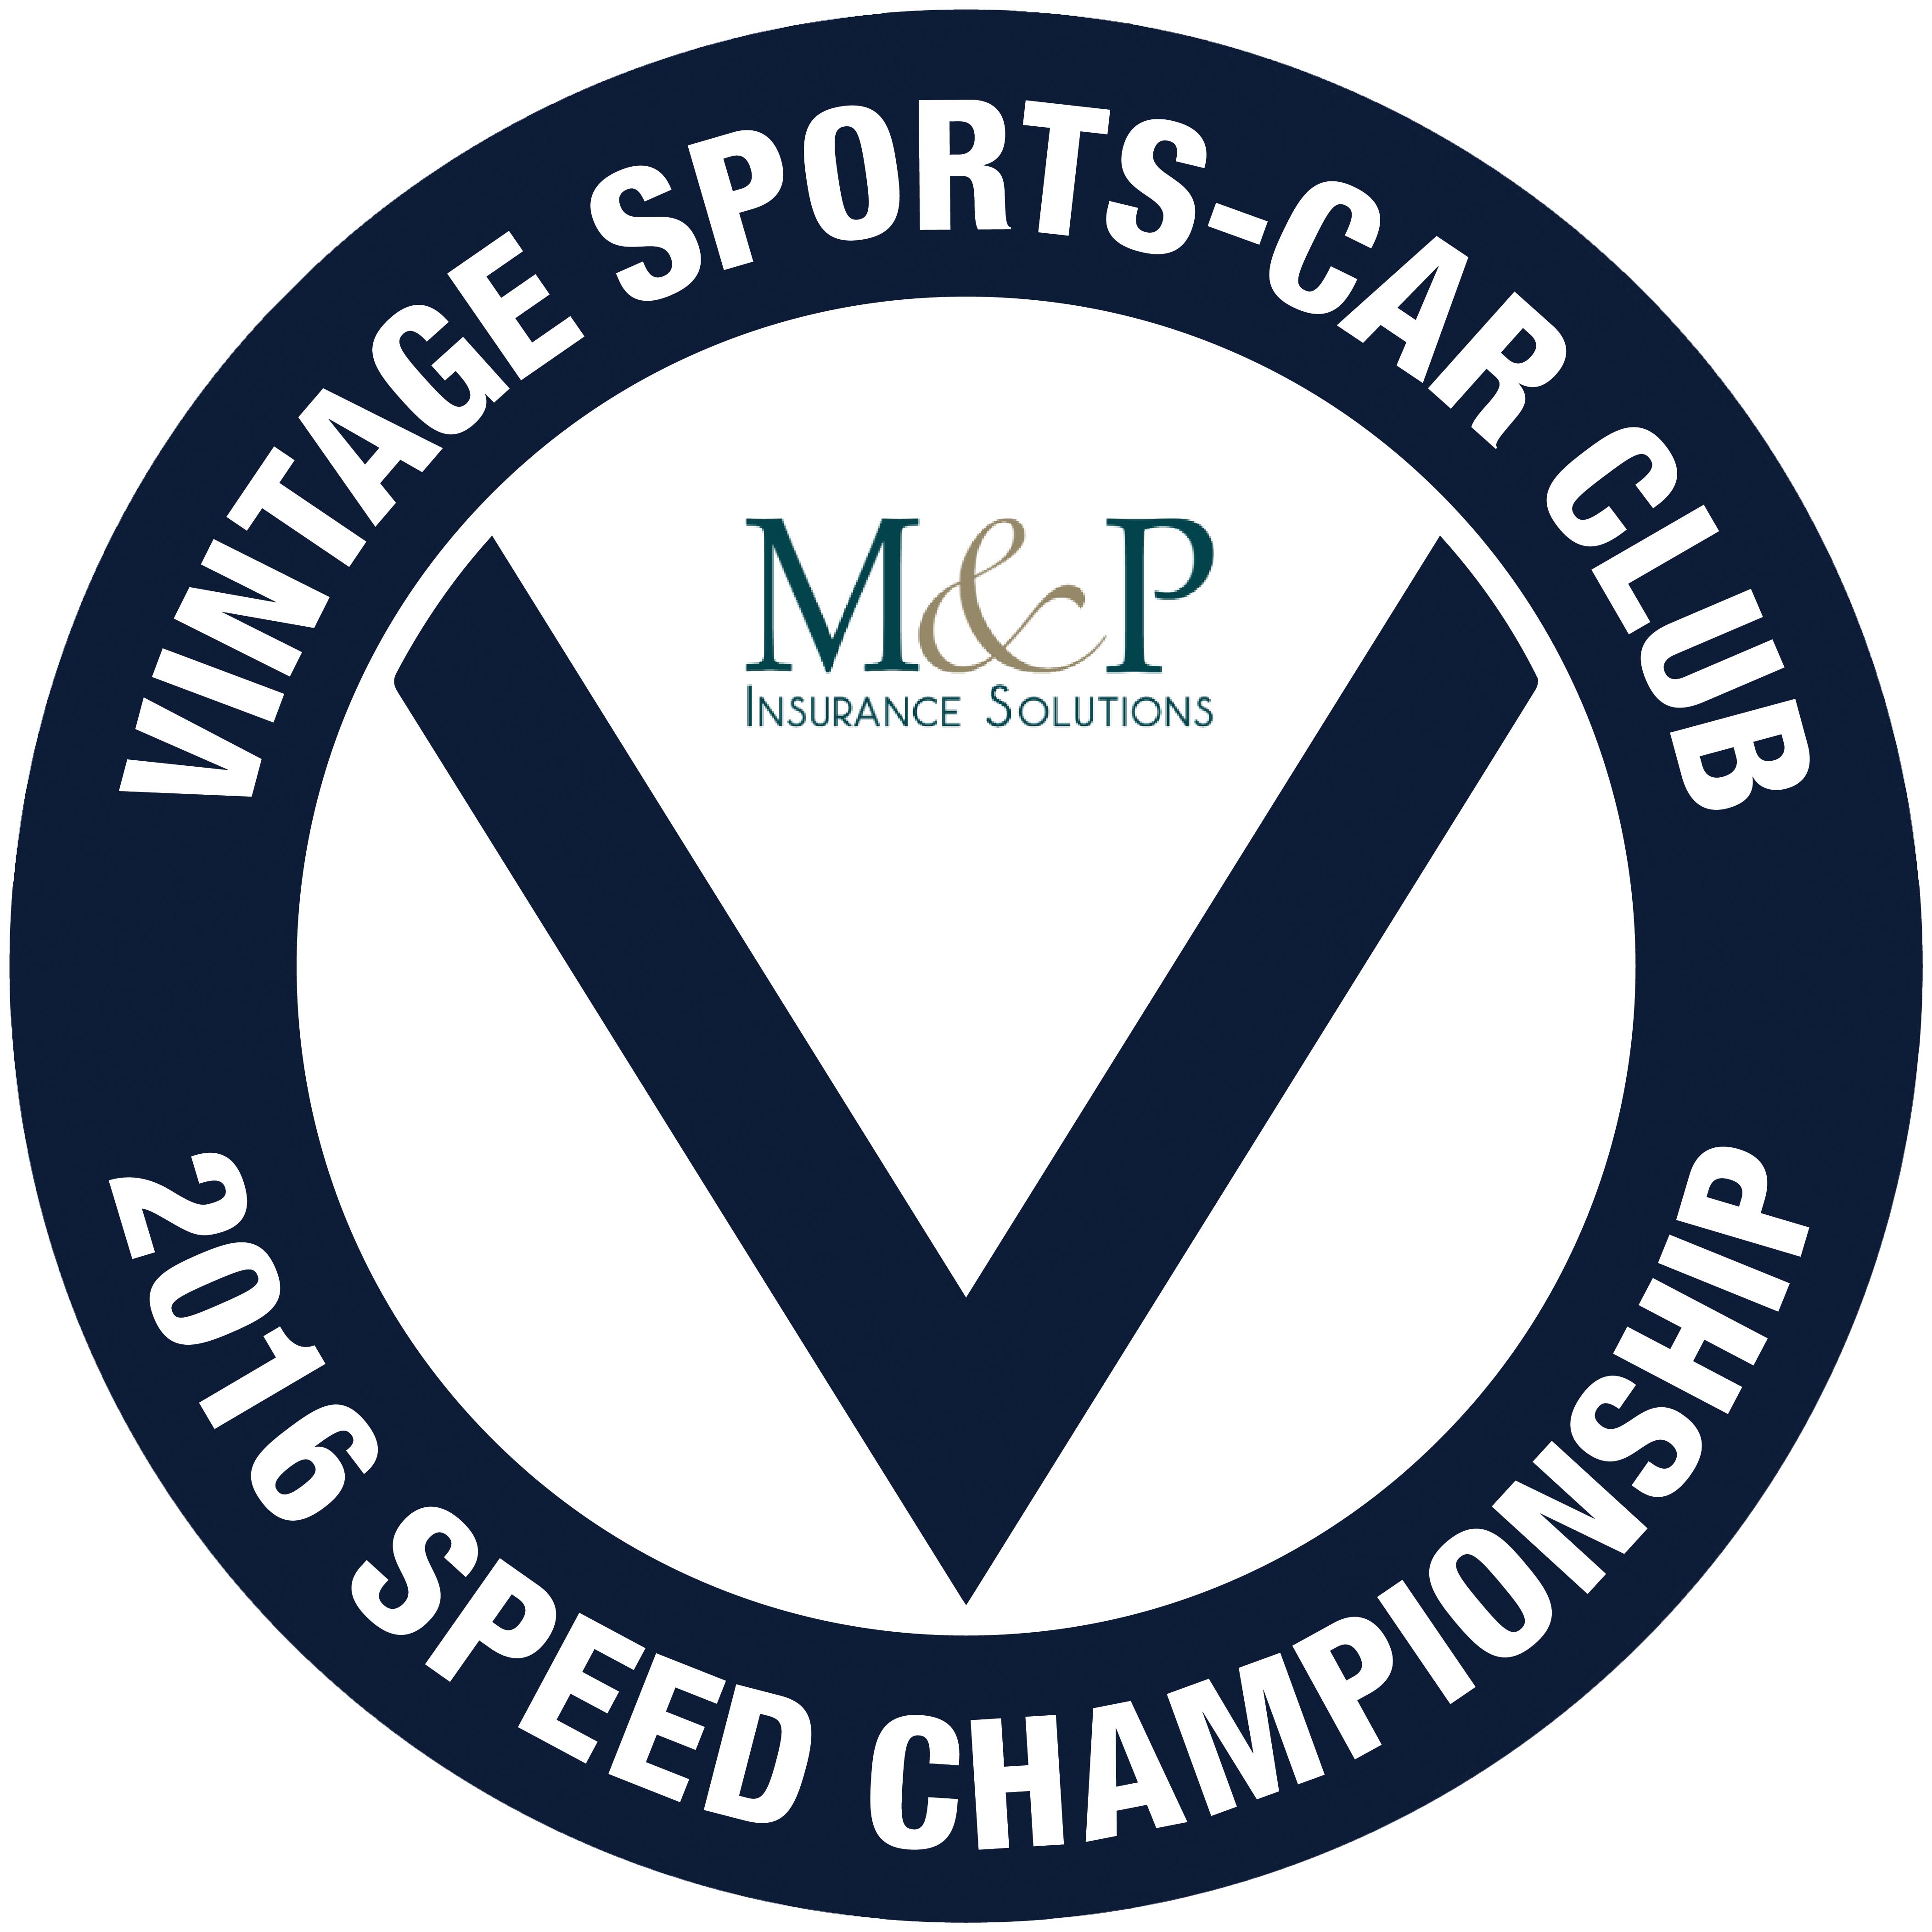 Less than two weeks until the start of the VSCC 2016 Speed Championship  cover